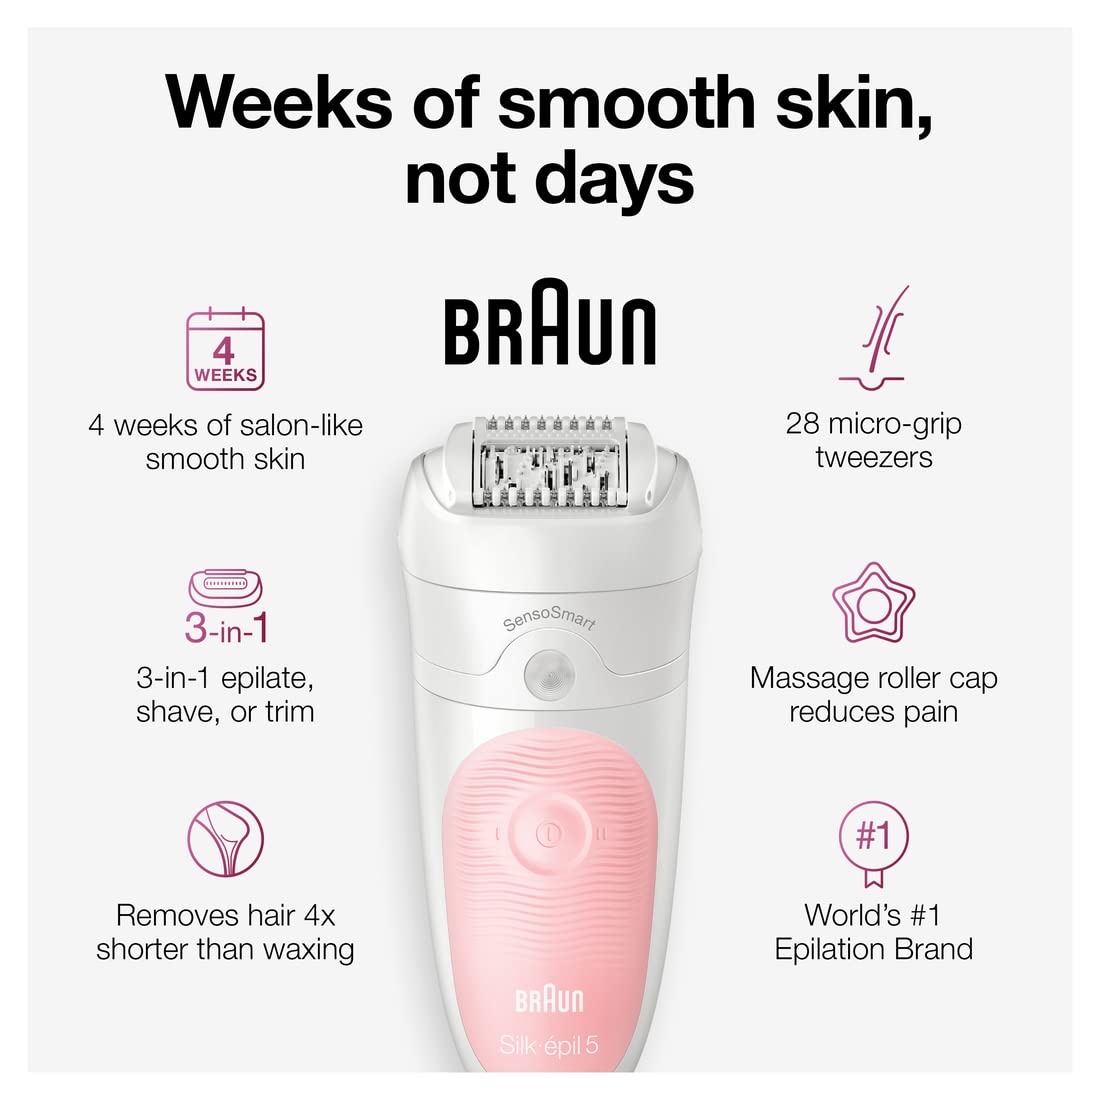 Get This Braun Hair Remover for 21% Off at